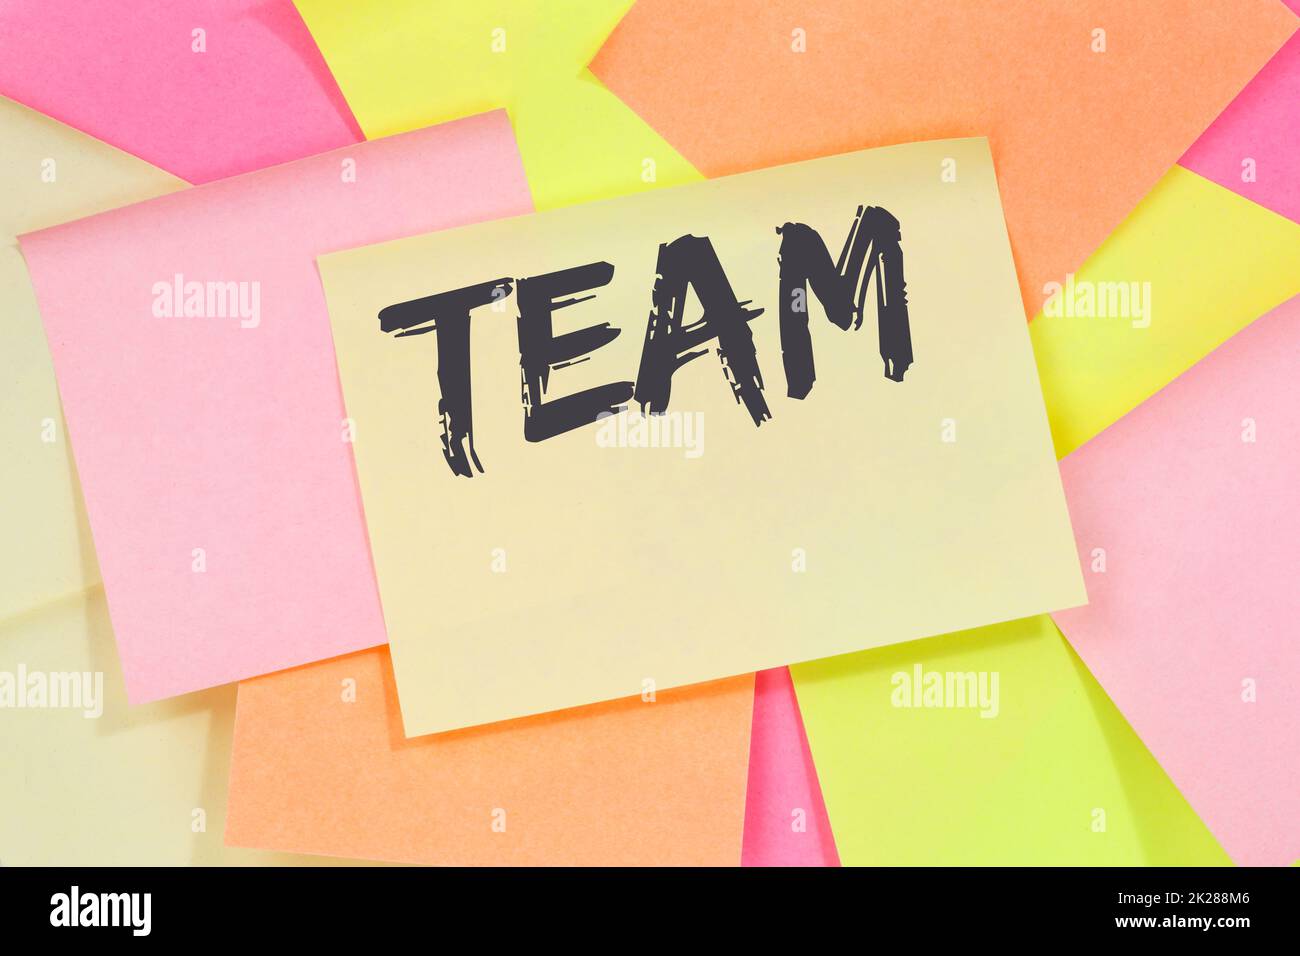 Team teamwork working together business concept office note paper Stock Photo